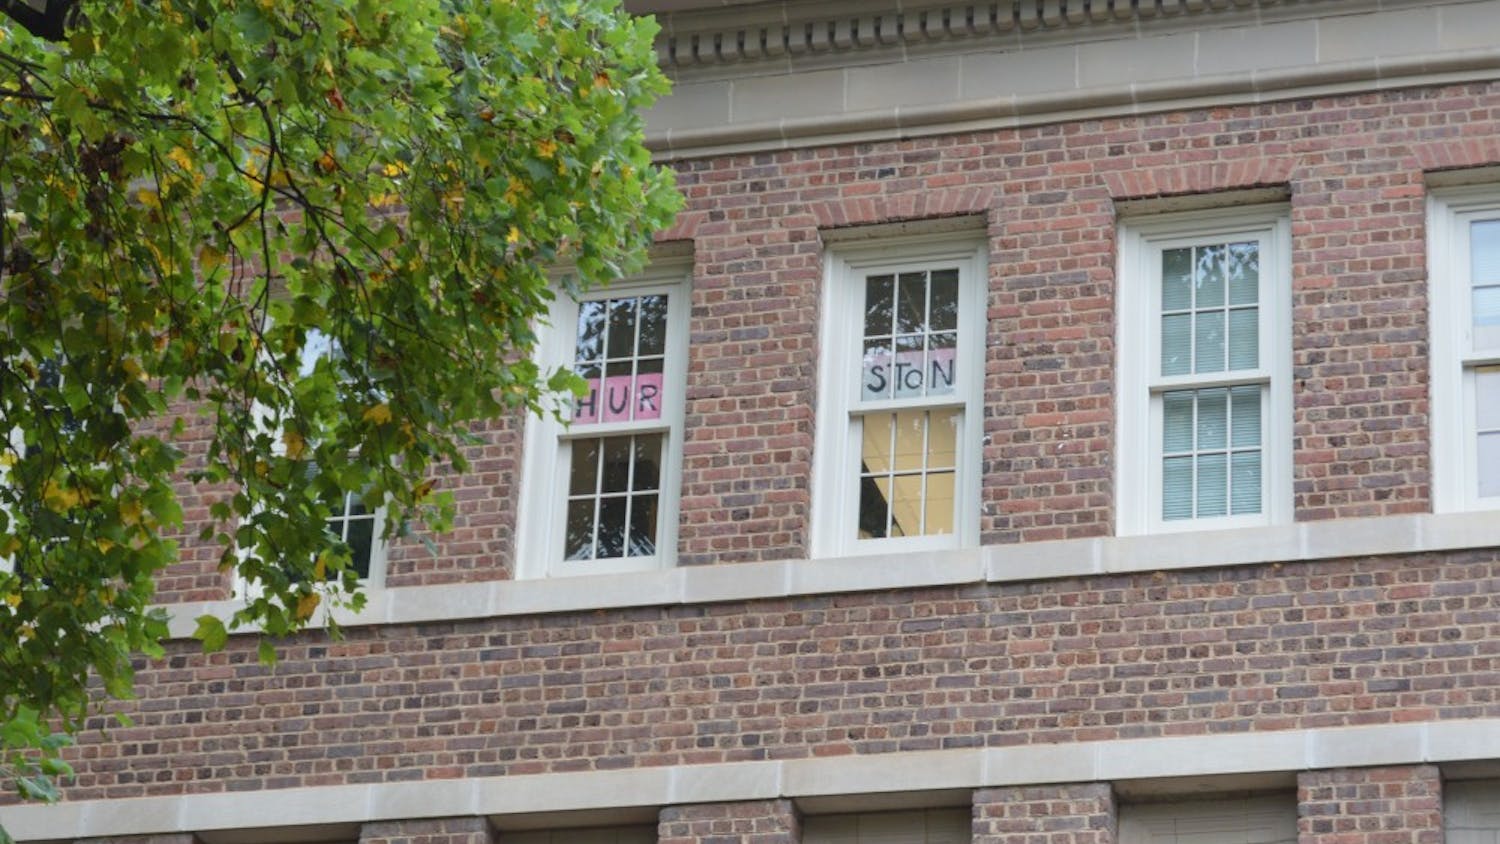 Professor Altha Cravey's third-floor office window displays a sign reading "Hurston" in the recently renamed Carolina Hall.